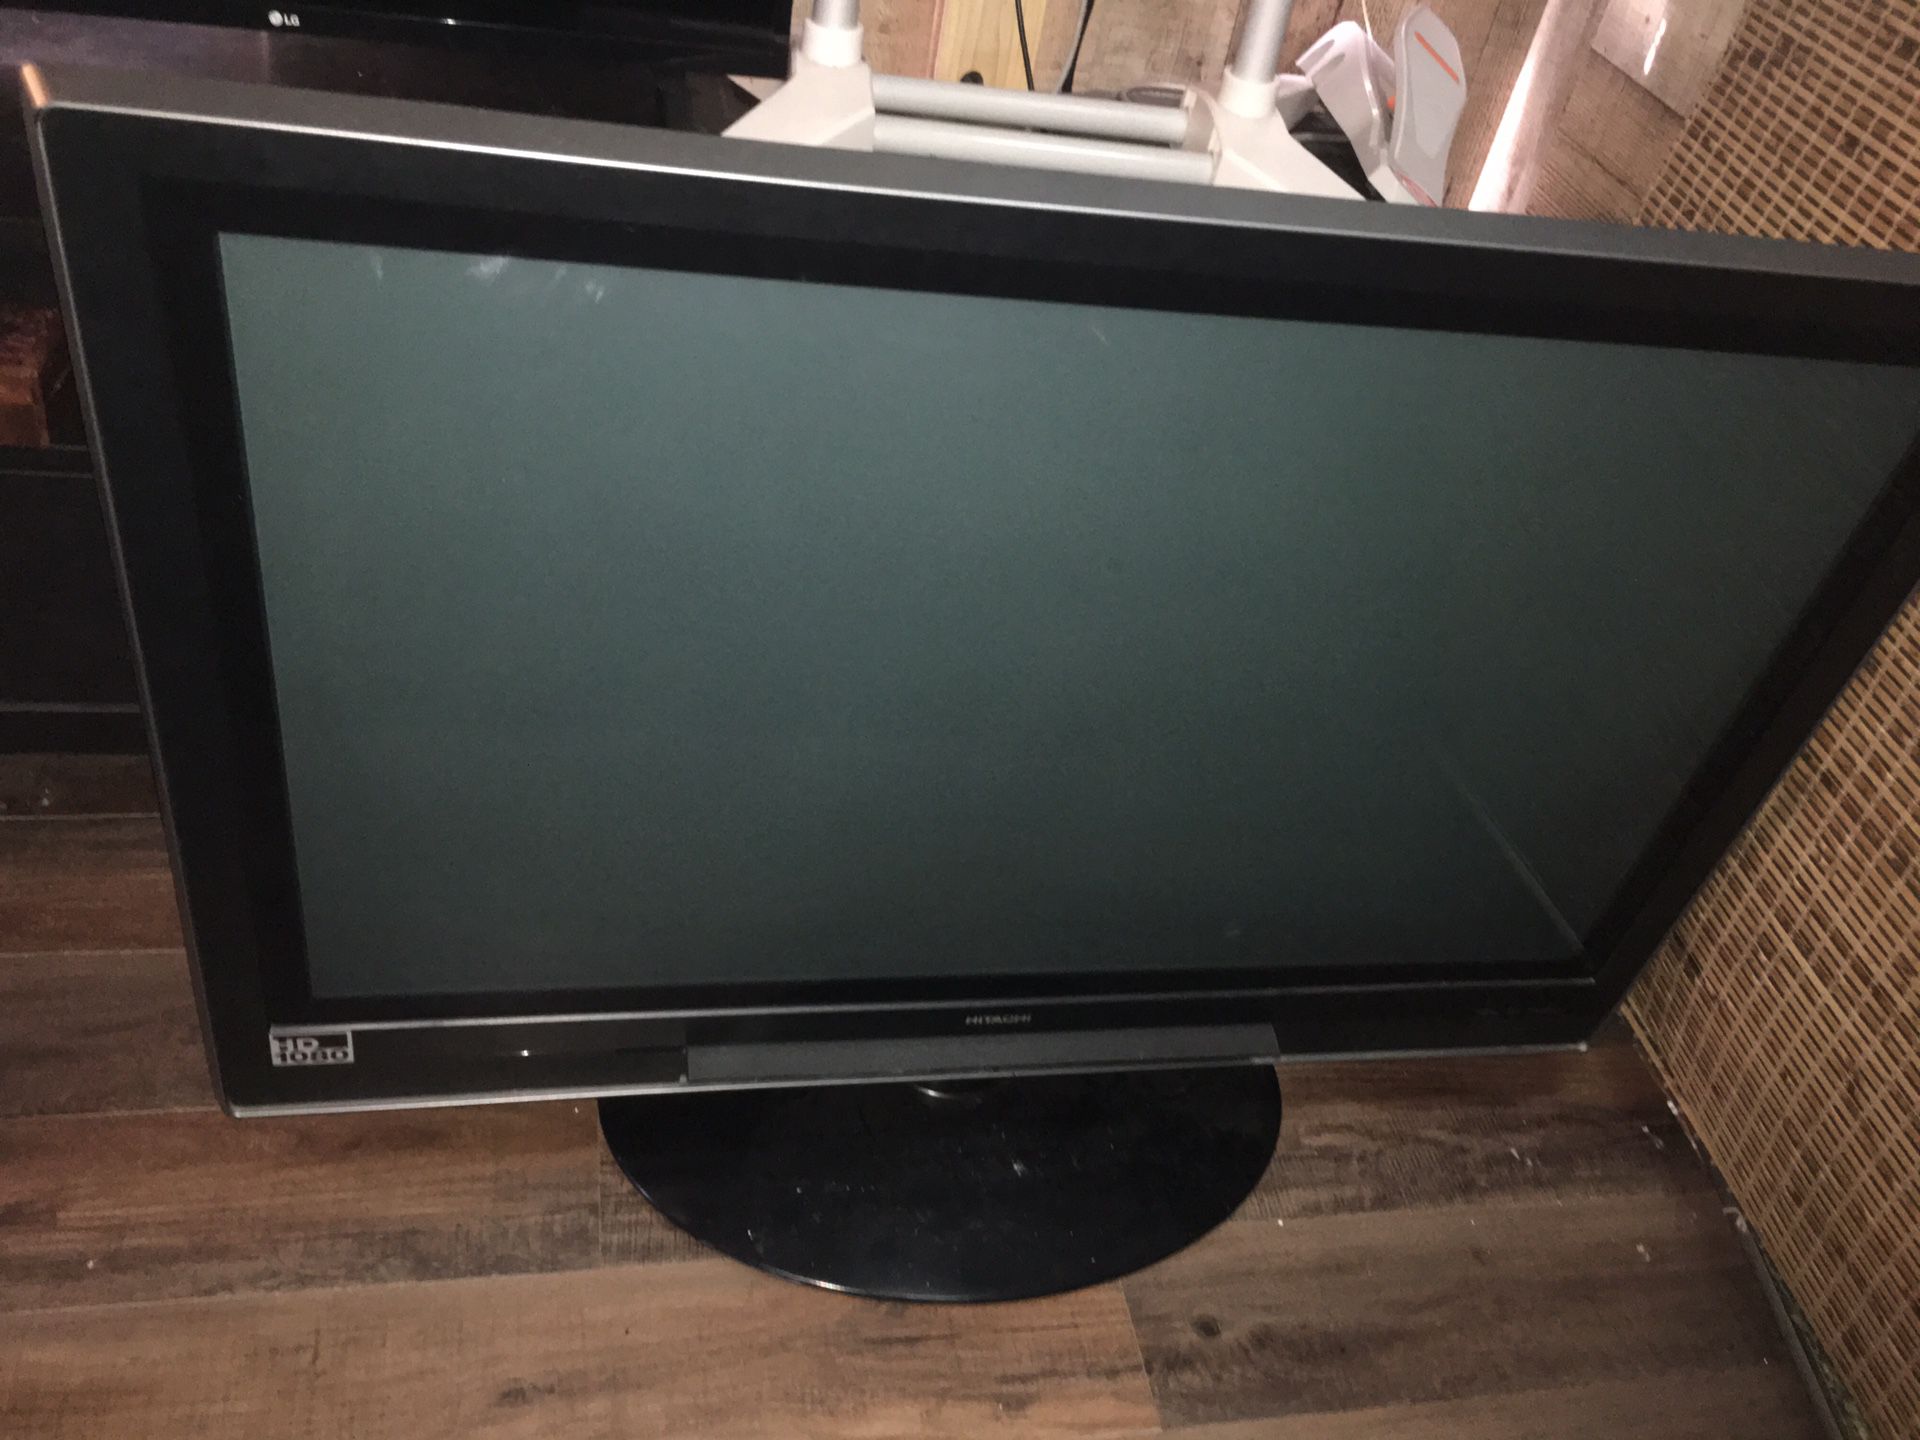 Hitashi 50 inch tv comes with remote works perfect